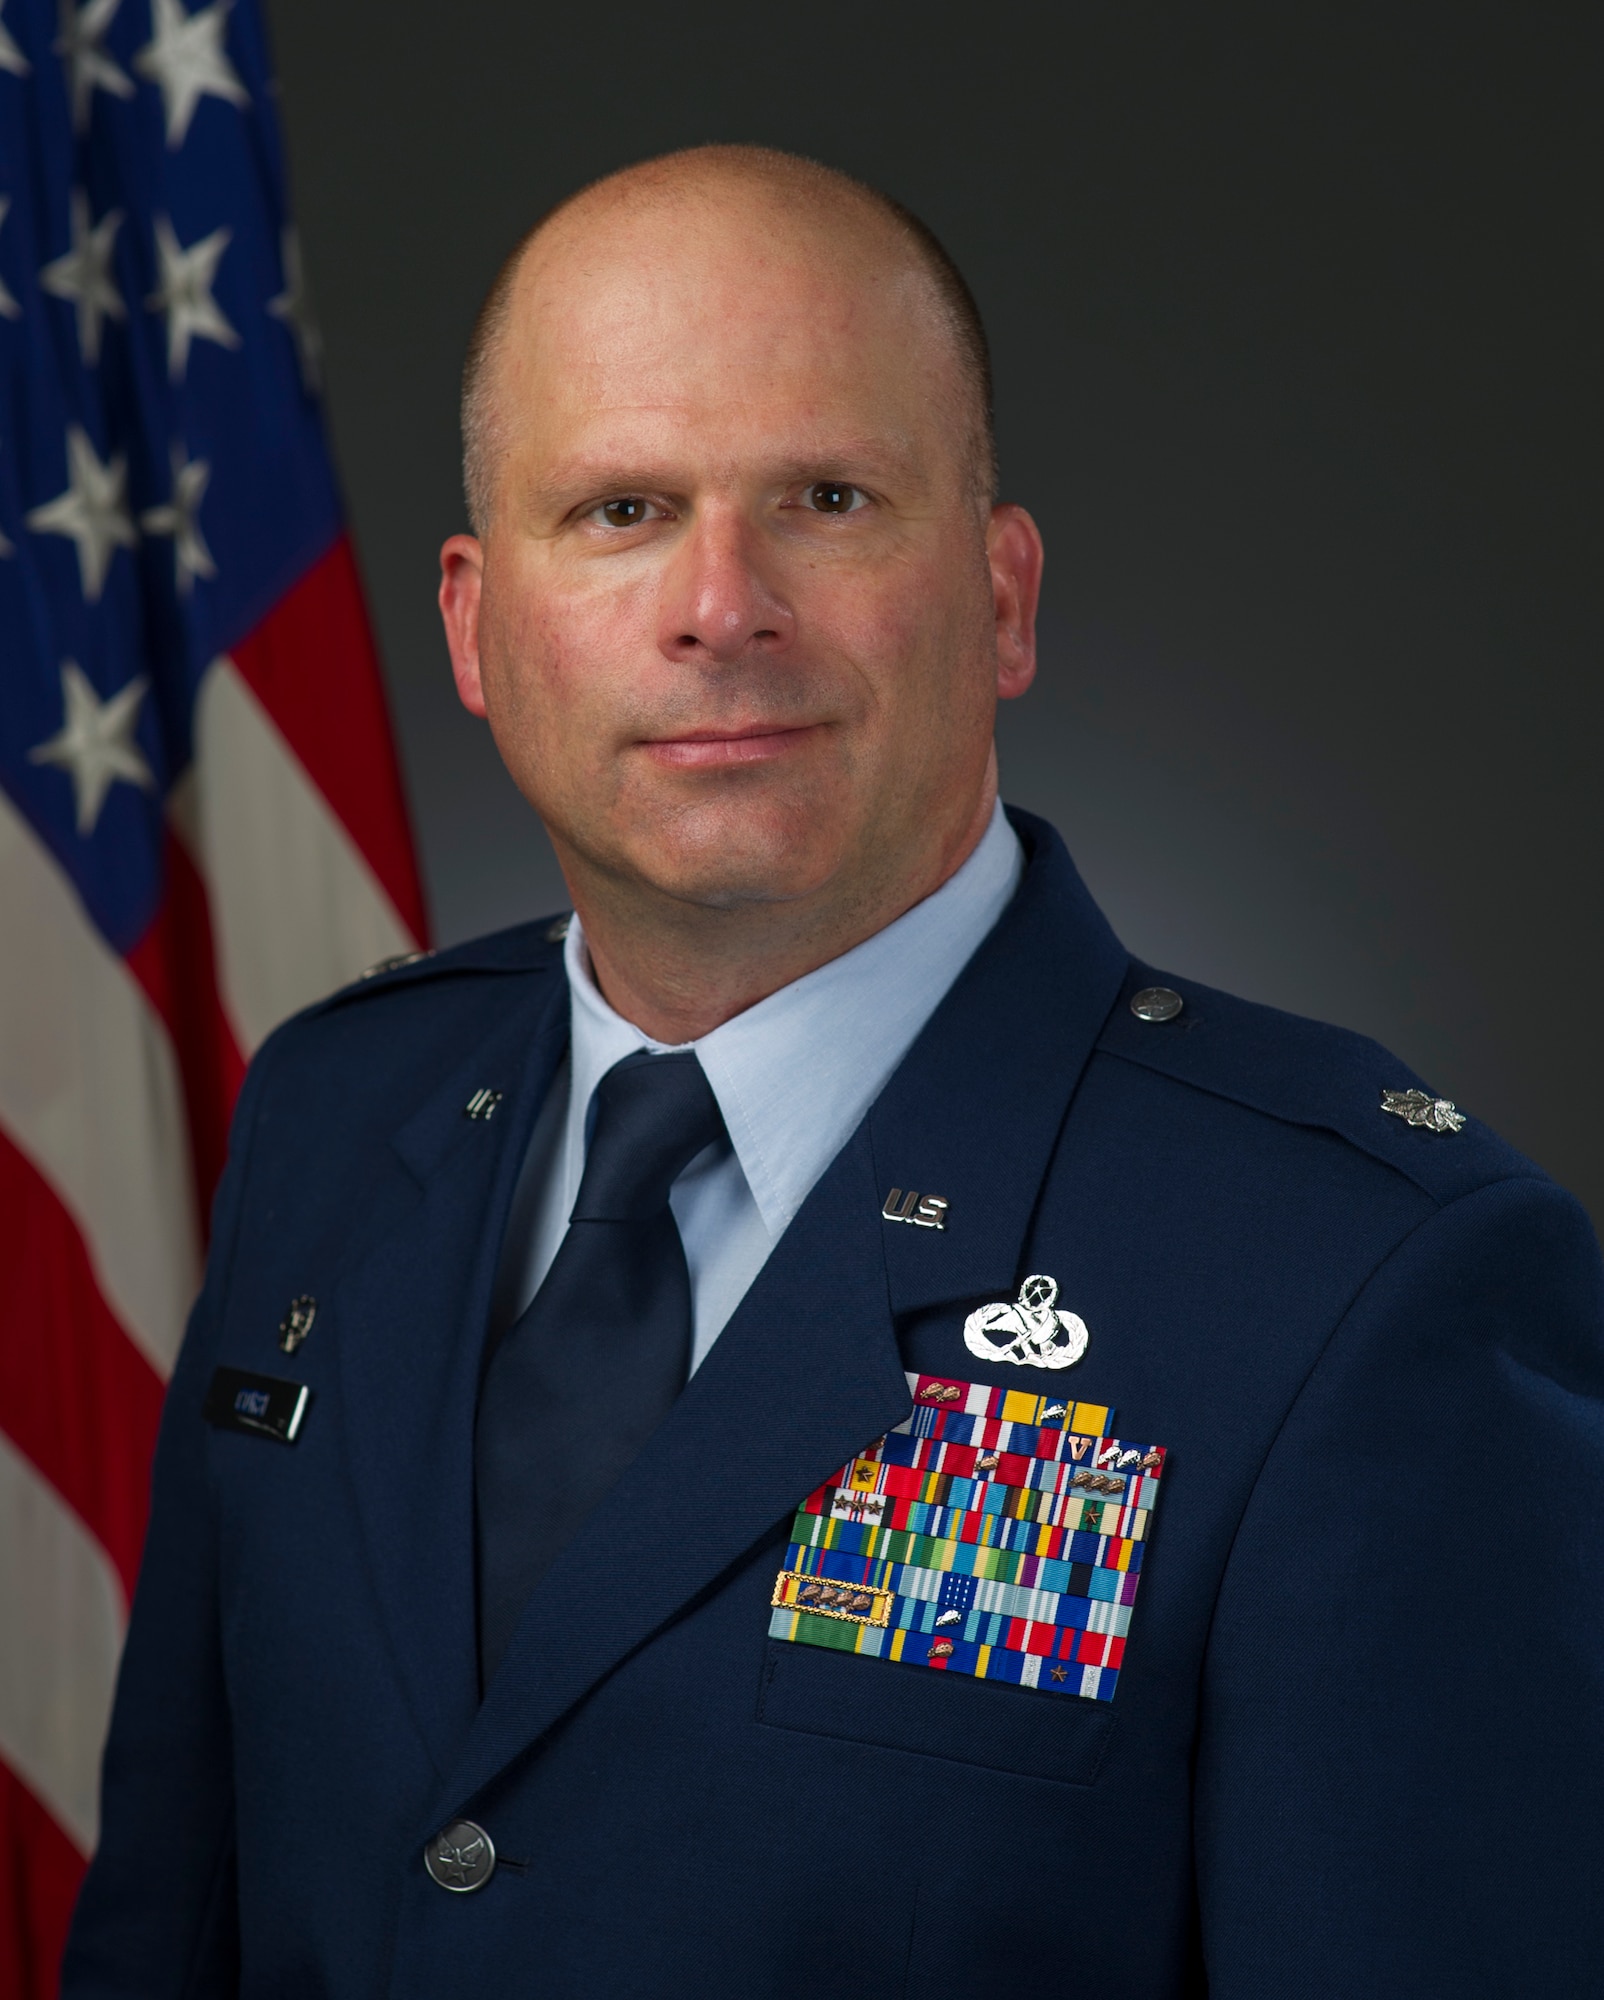 Lt. Col. Robert Corsi, 60th Maintenance Squadron commander, shares some thoughts on leadership. (Courtesy Photo)